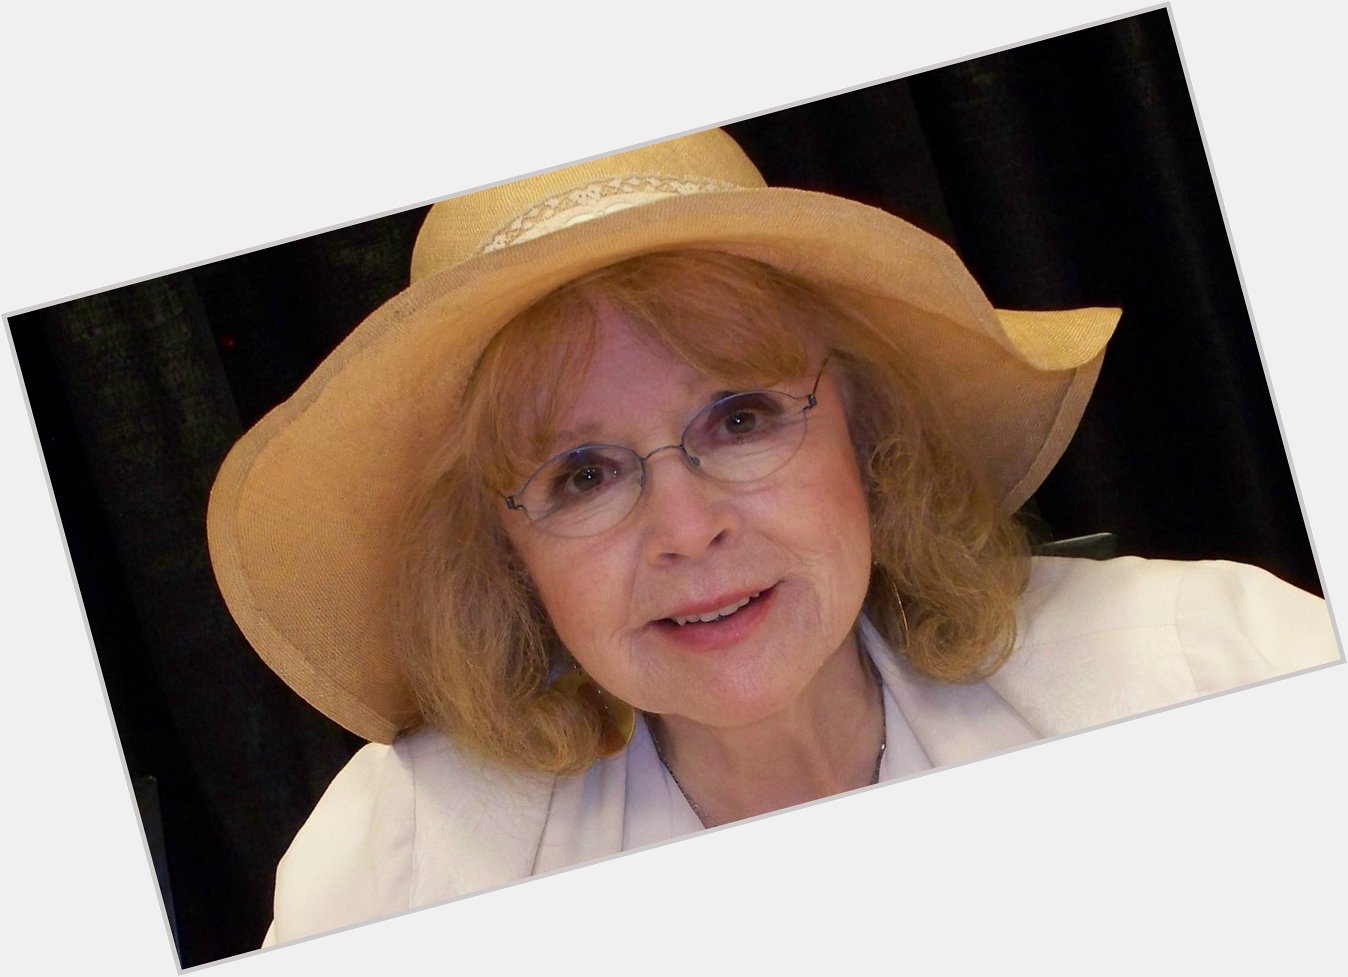  We wish a very happy birthday to Piper Laurie! 